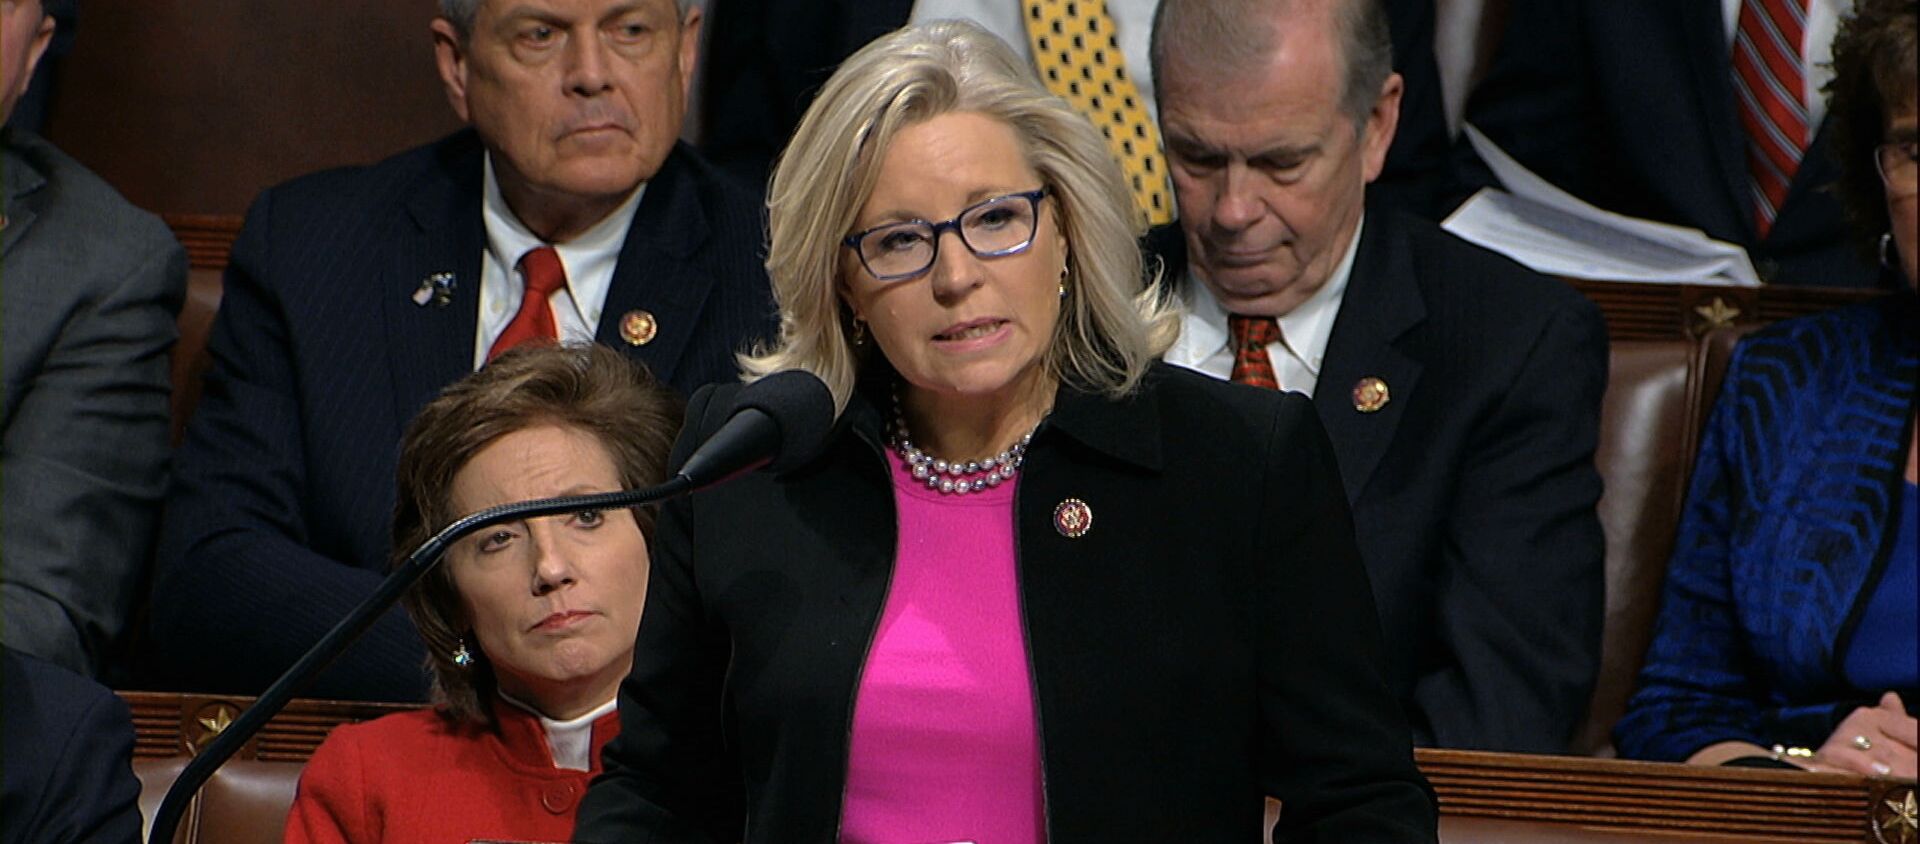 Rep. Liz Cheney, R-Wyo., speaks as the House of Representatives debates the articles of impeachment against President Donald Trump at the Capitol in Washington, Wednesday, Dec. 18, 2019. - Sputnik International, 1920, 07.02.2021